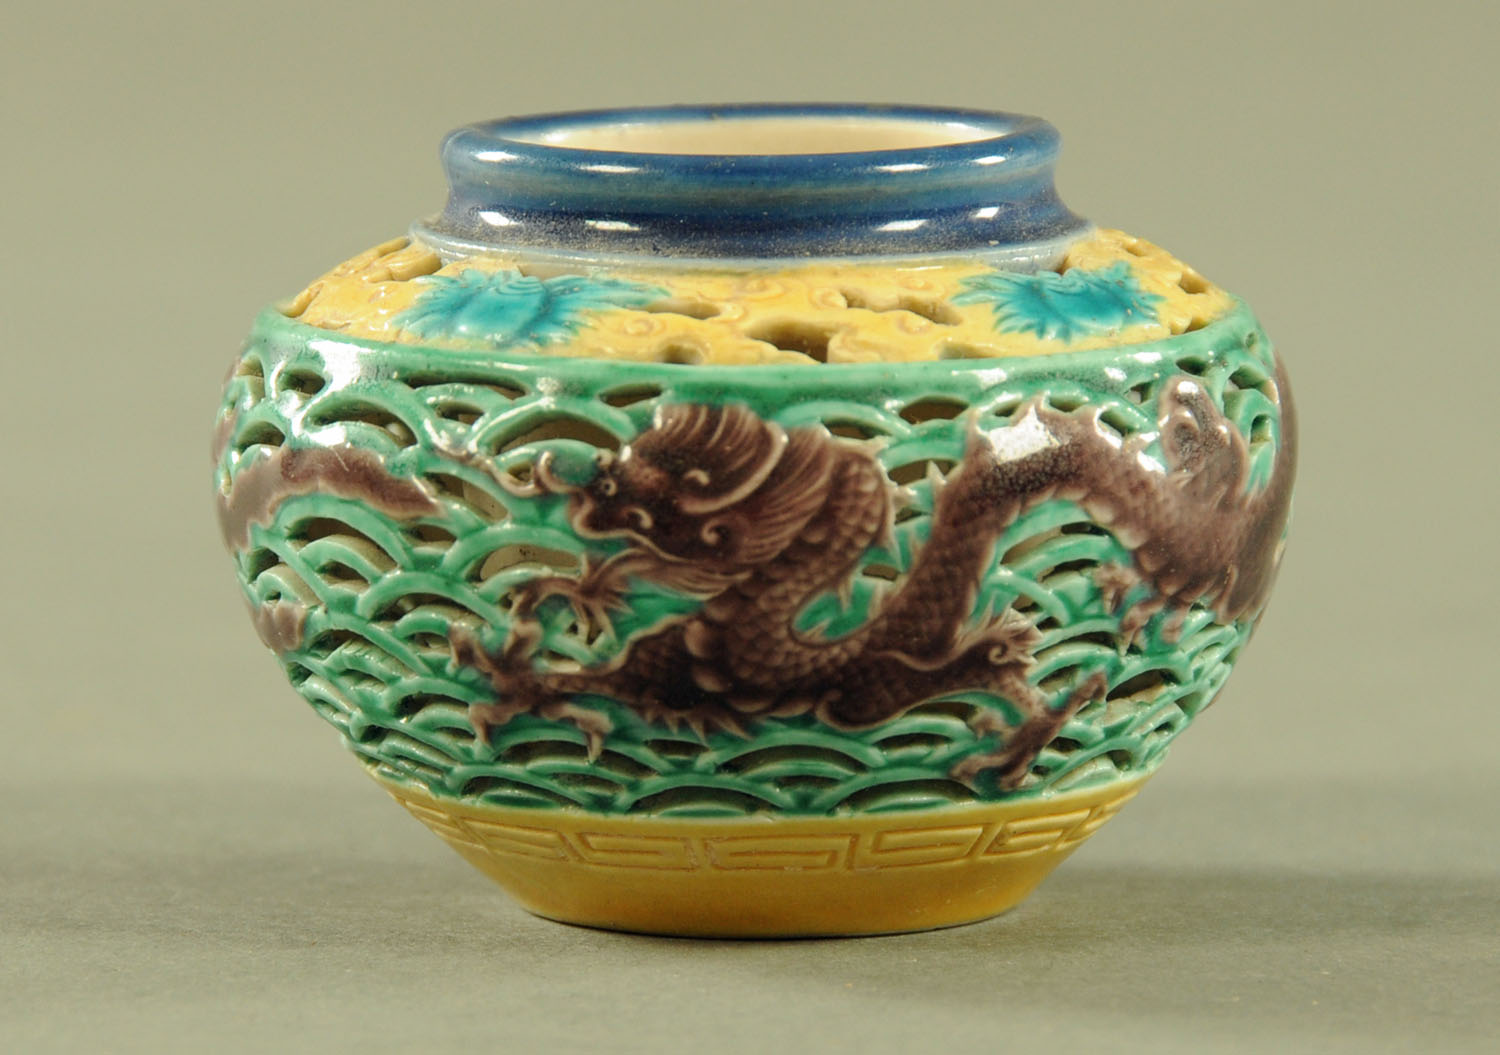 A Japanese ware reticulated pot, decorated with a dragon and marked Makuso Hozan Yokohama 1910.